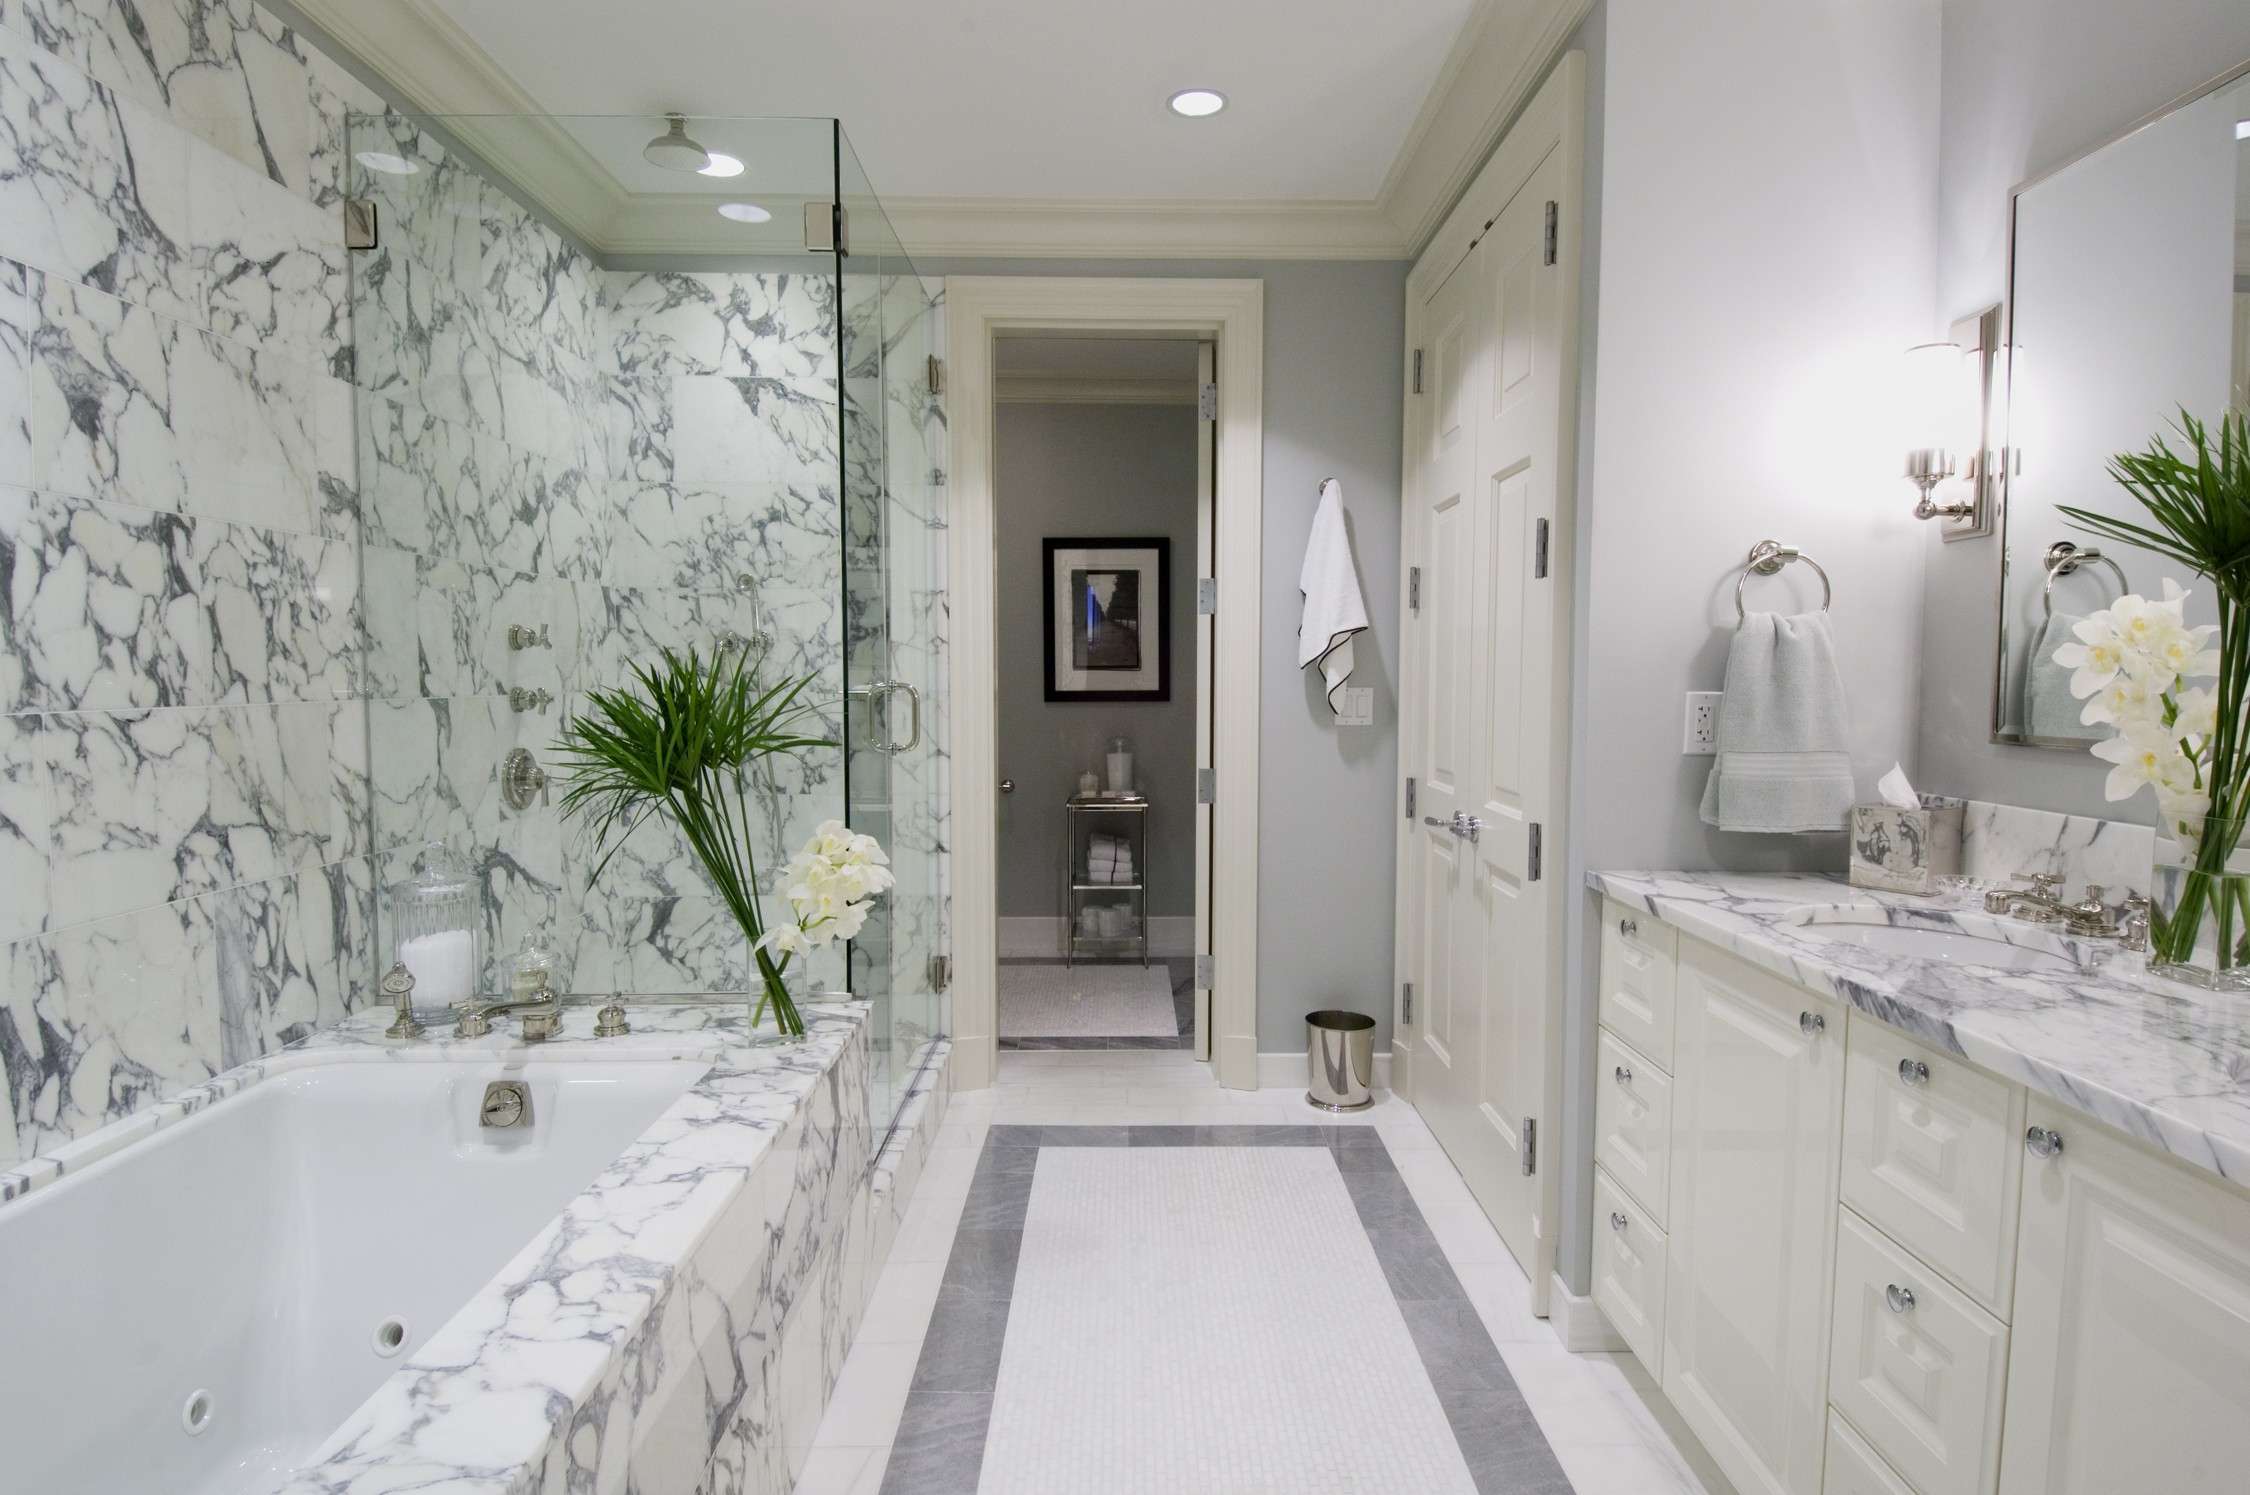 Marble Bathroom Tile
 Why You Should Use Marble In Your Bathroom Remodel